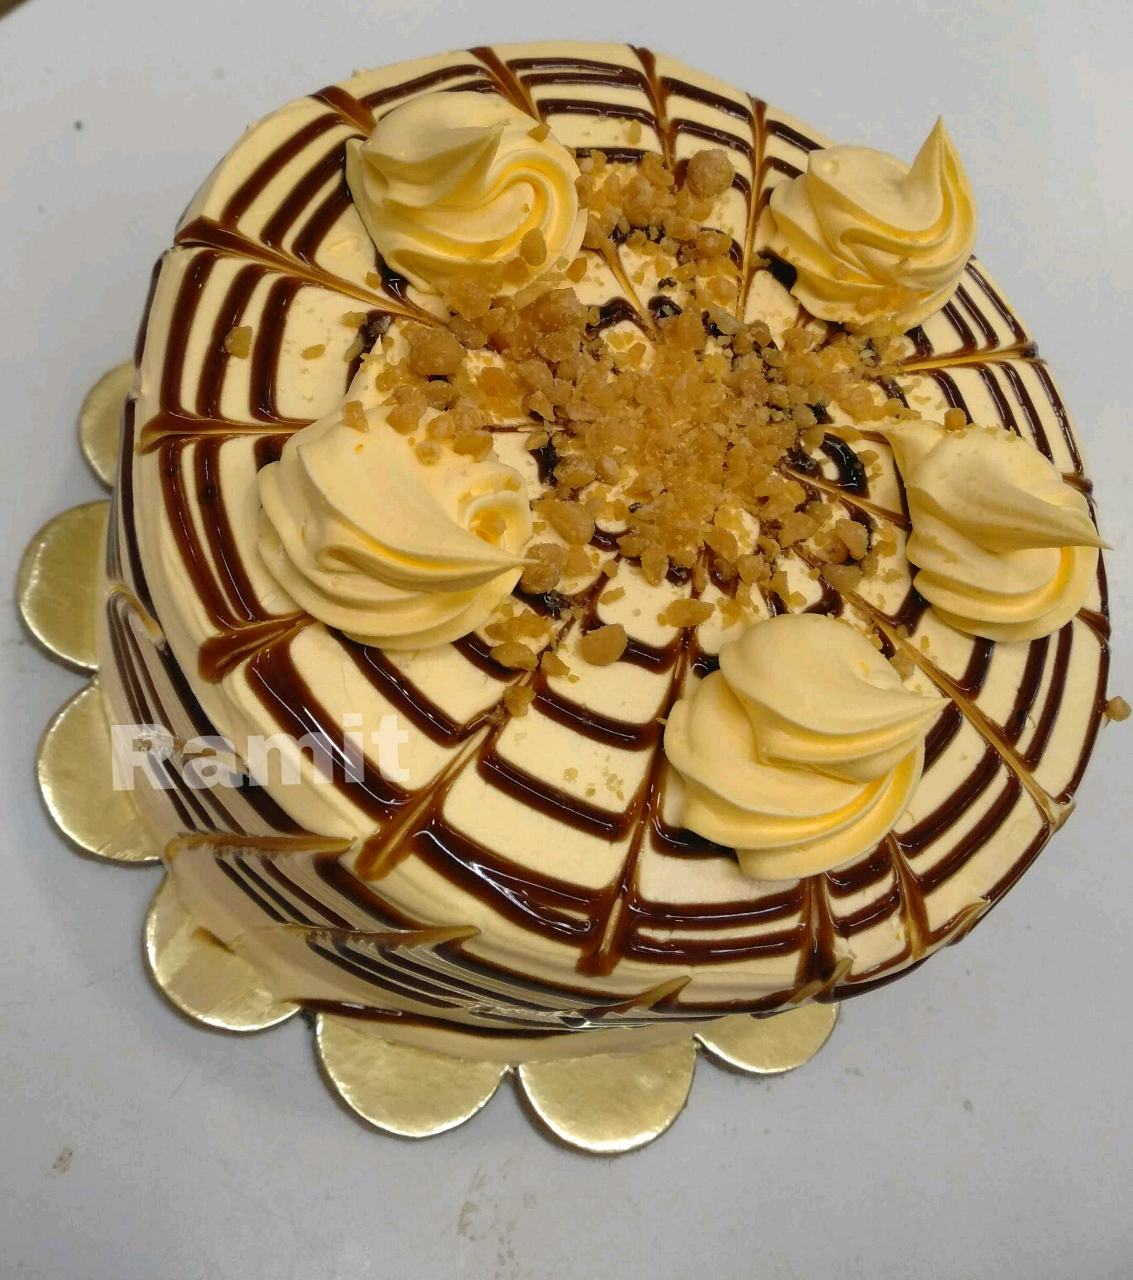 ButterScotch Cake With ButterScotch Frosting.....(Rich Royal Cake,Loaded With Butterscotch Chips)